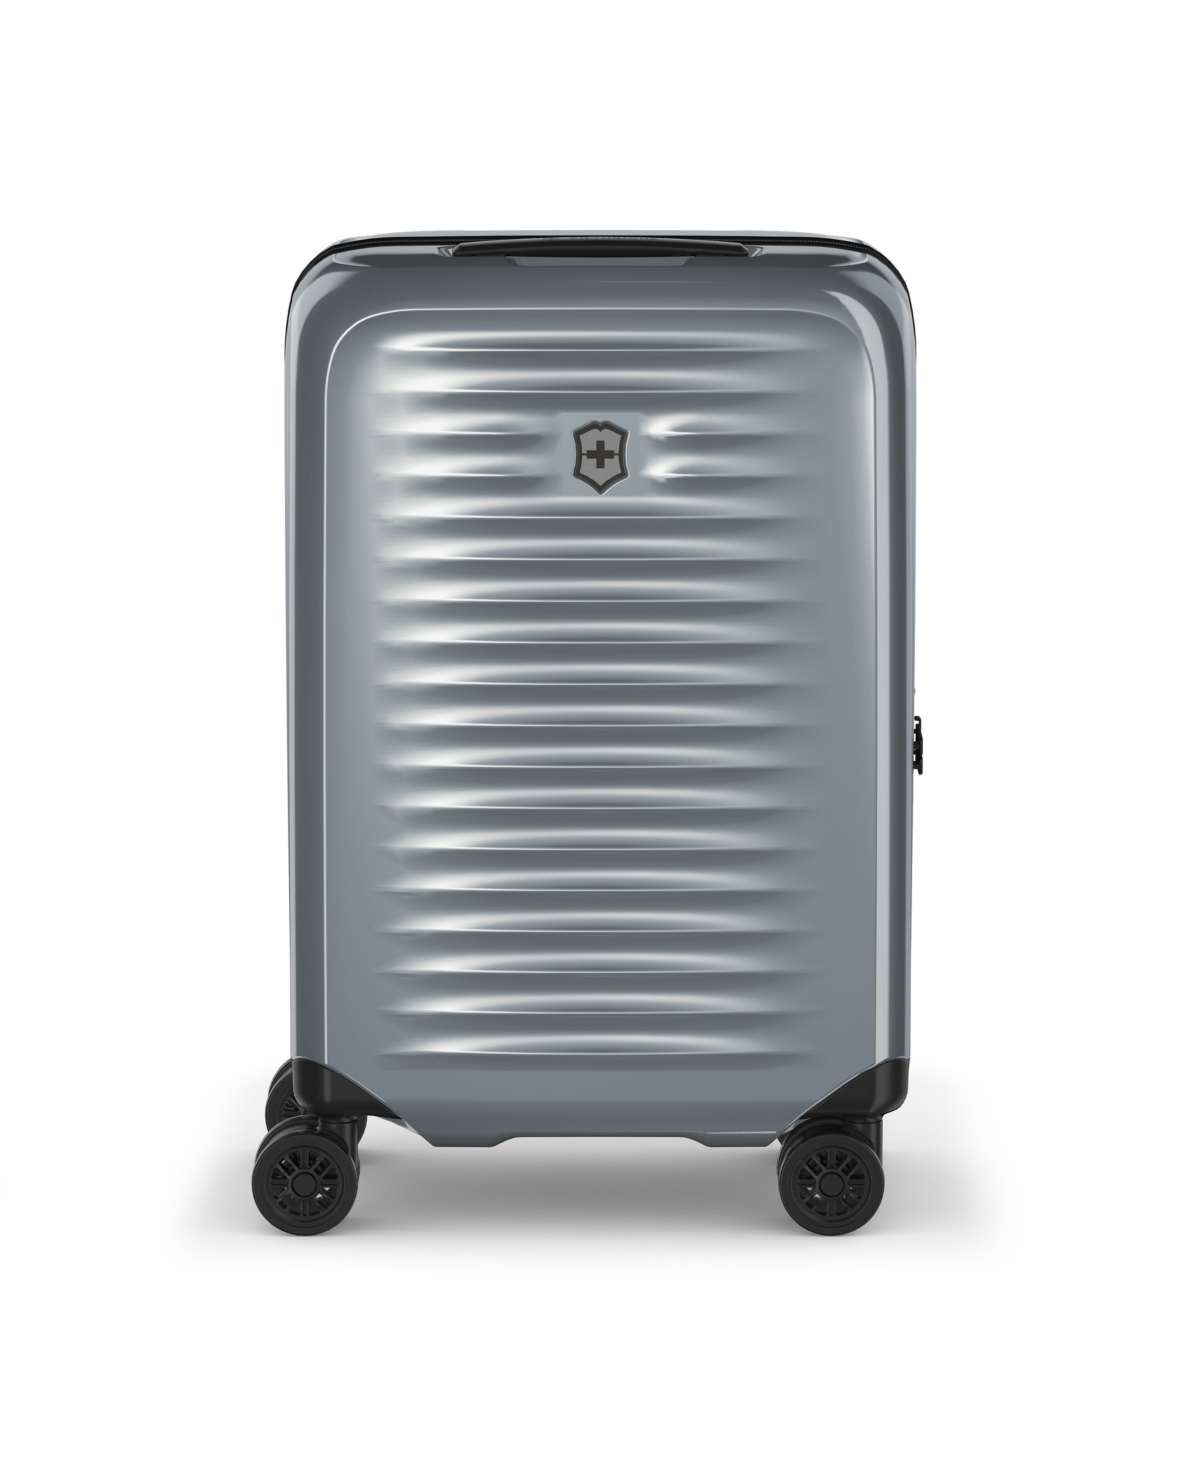 Airox Frequent Flyer 21" Carry-On Hardside Suitcase - Silver-Tone